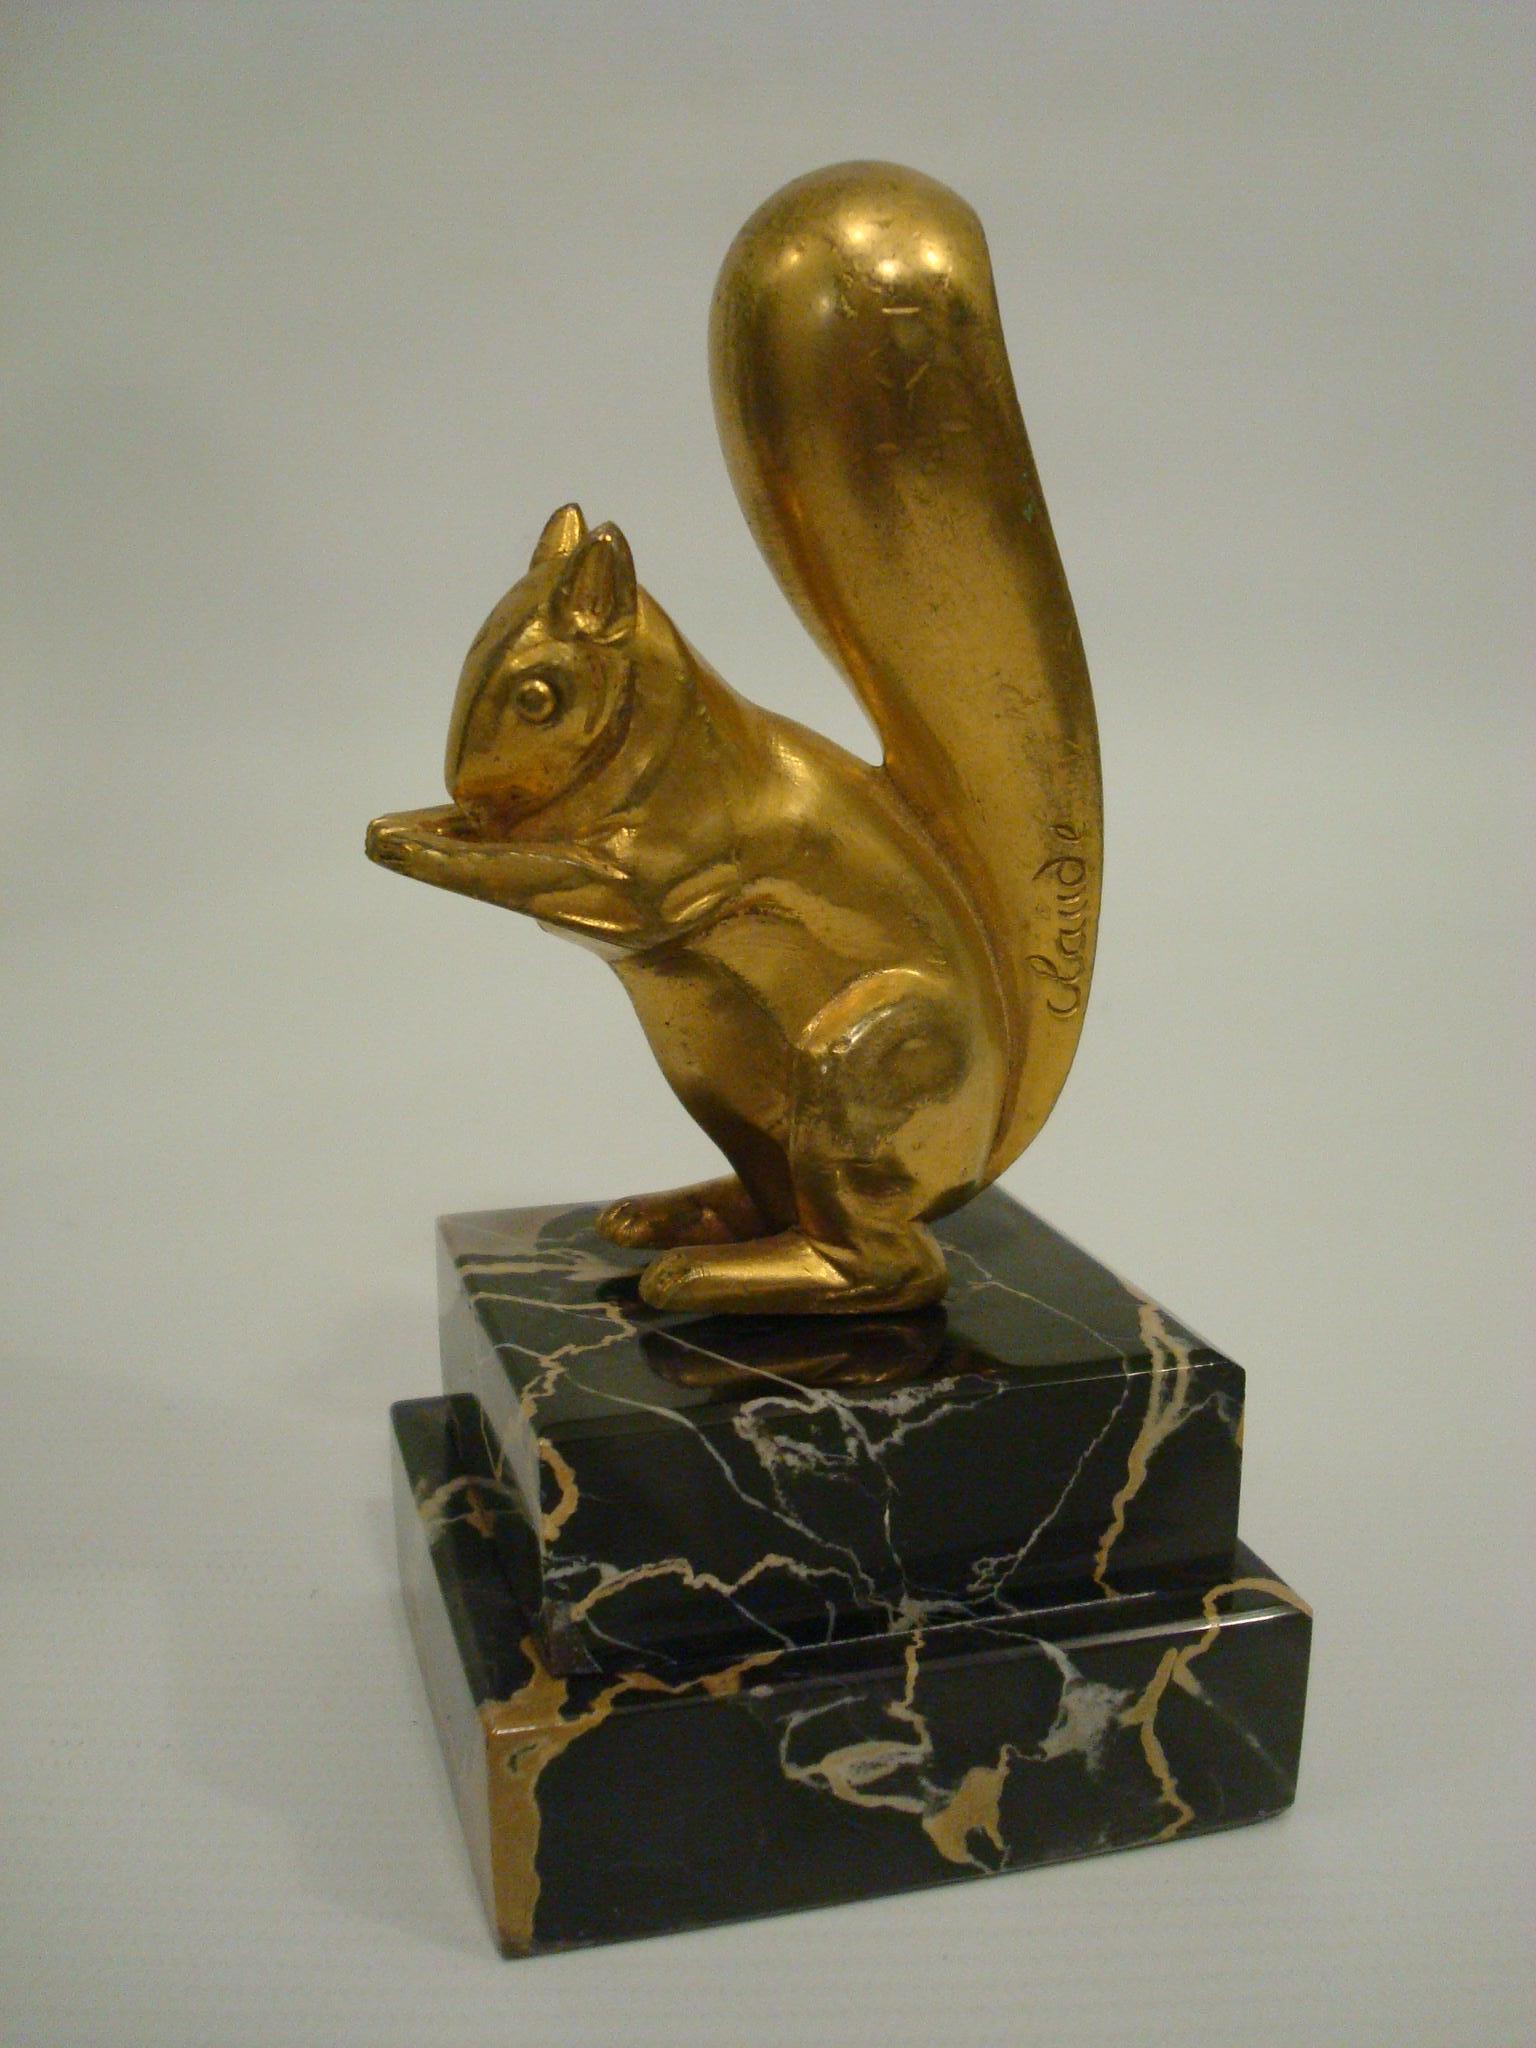 Cute Art Deco Paperweight / Car Mascot Gilt Bronze in the shape of squirrel. Signed by the French artist Claude and with the founders' signature of Marcel Guillemard. Mounted on a marble base, France, 1925.
Numbered and signed: 